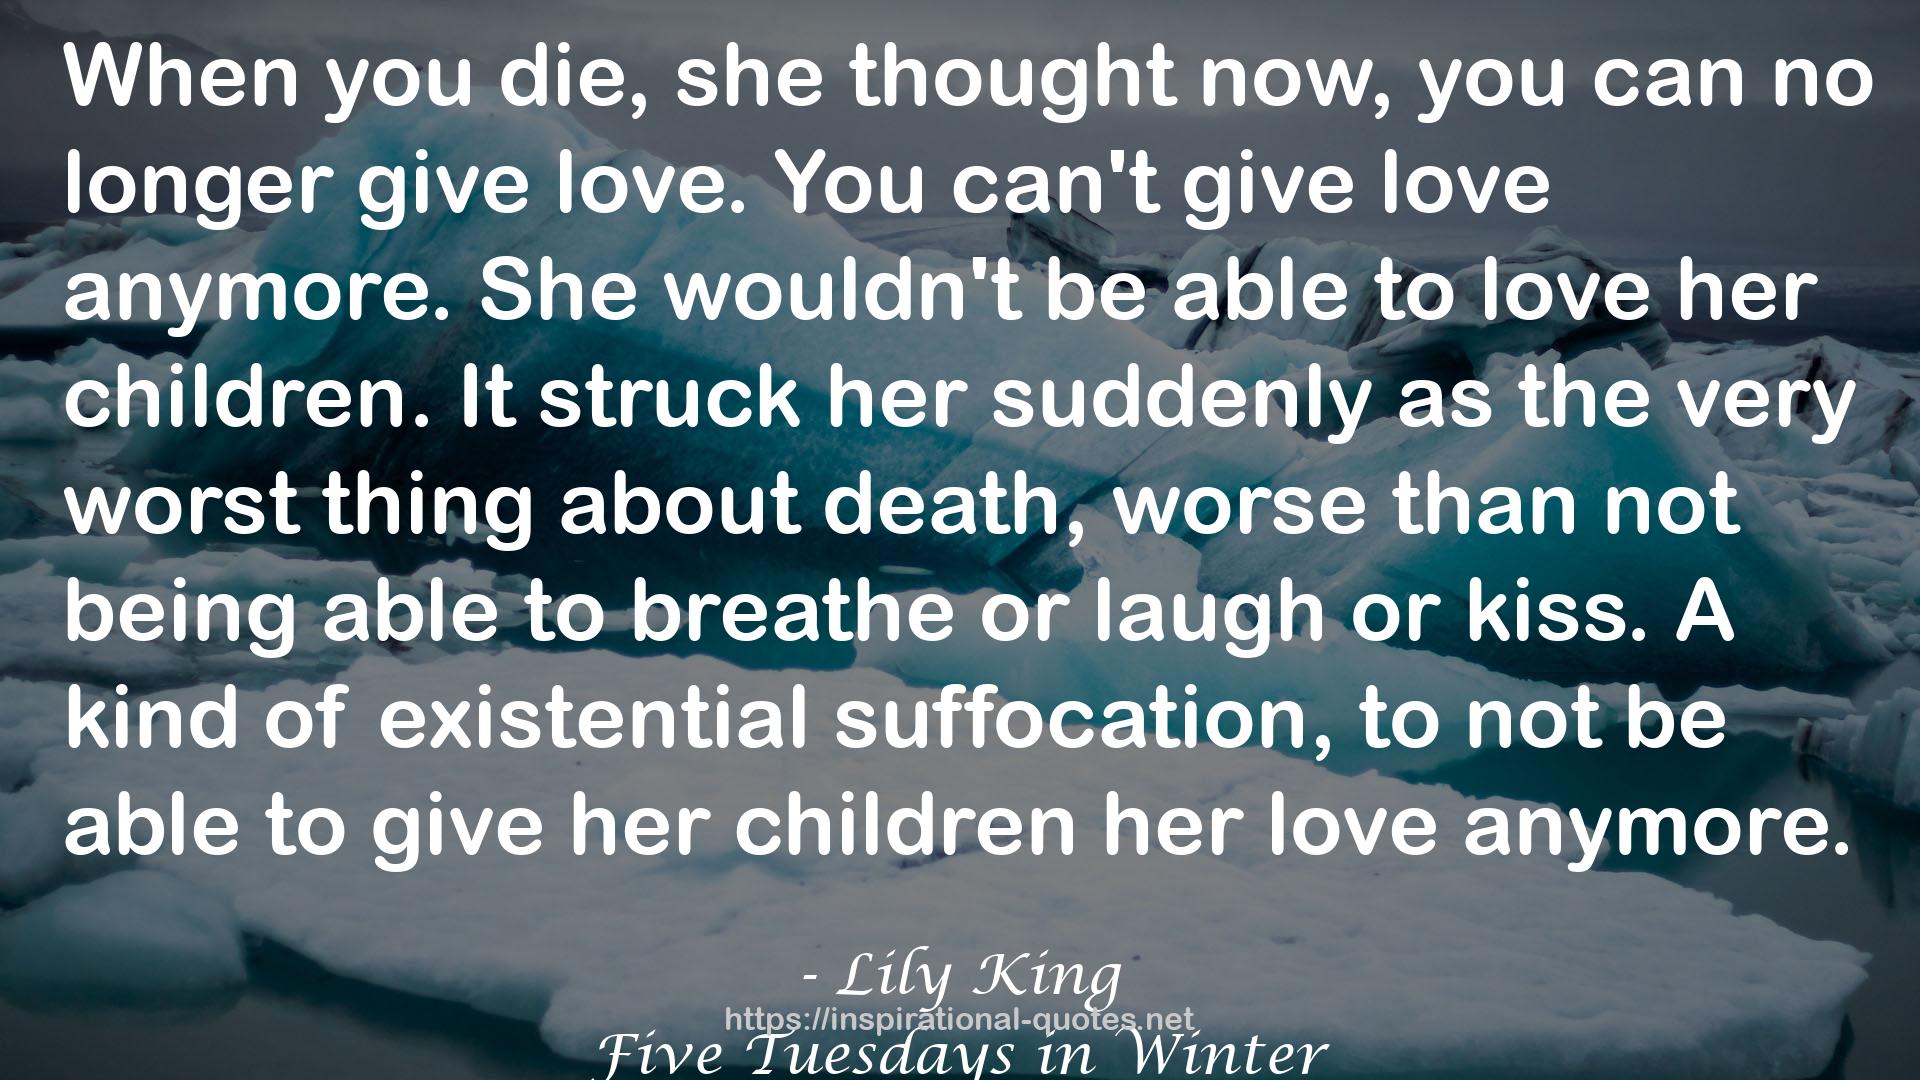 Five Tuesdays in Winter QUOTES